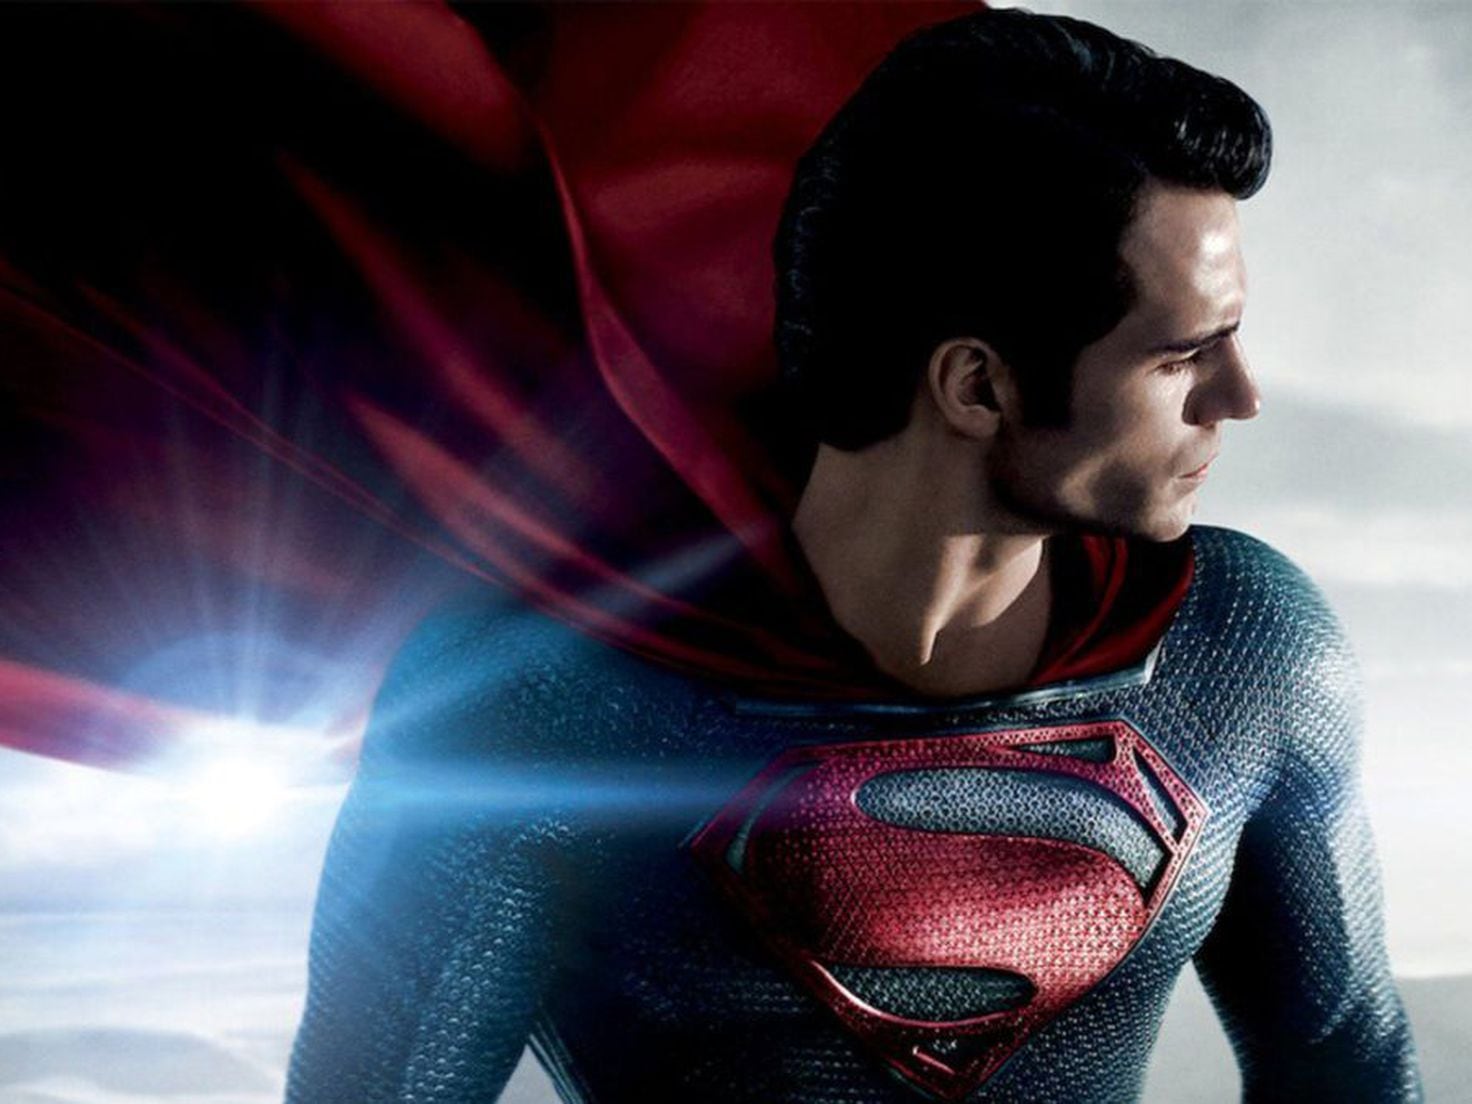 Is Henry Cavill Still Superman in the DC Movies? An Investigation